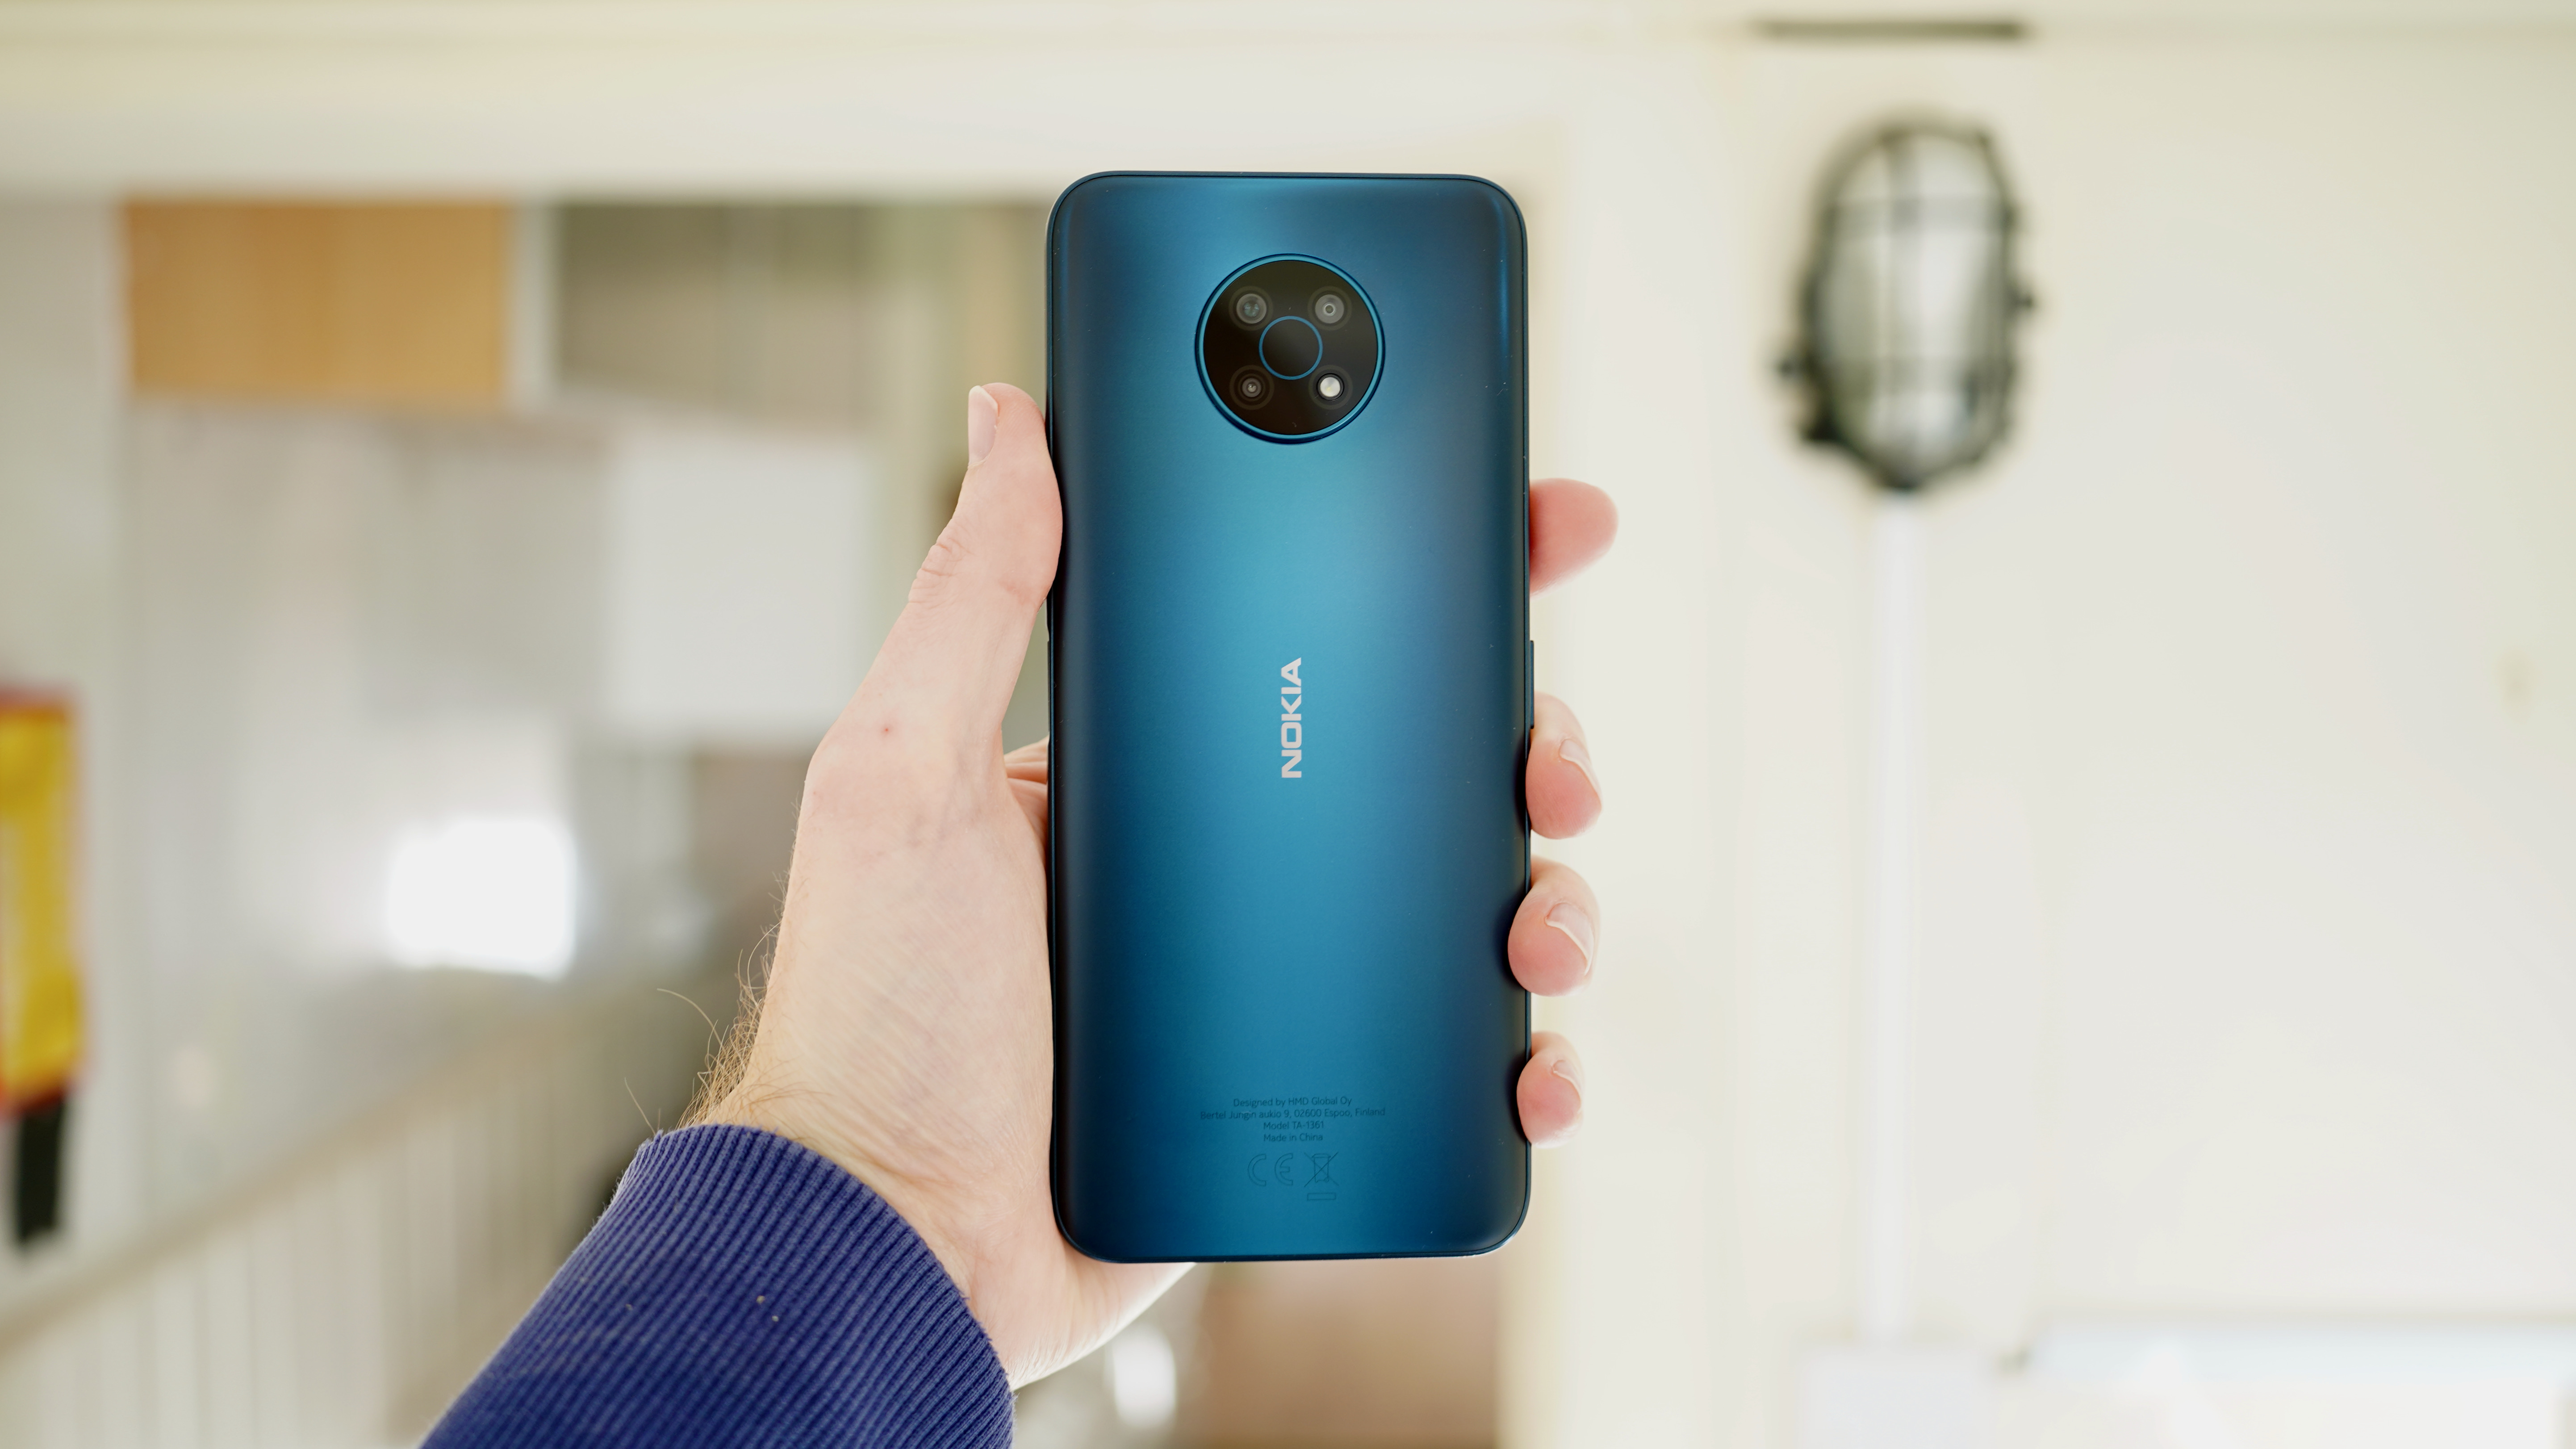 A photo of the Nokia G50 in blue, held in someone's hand